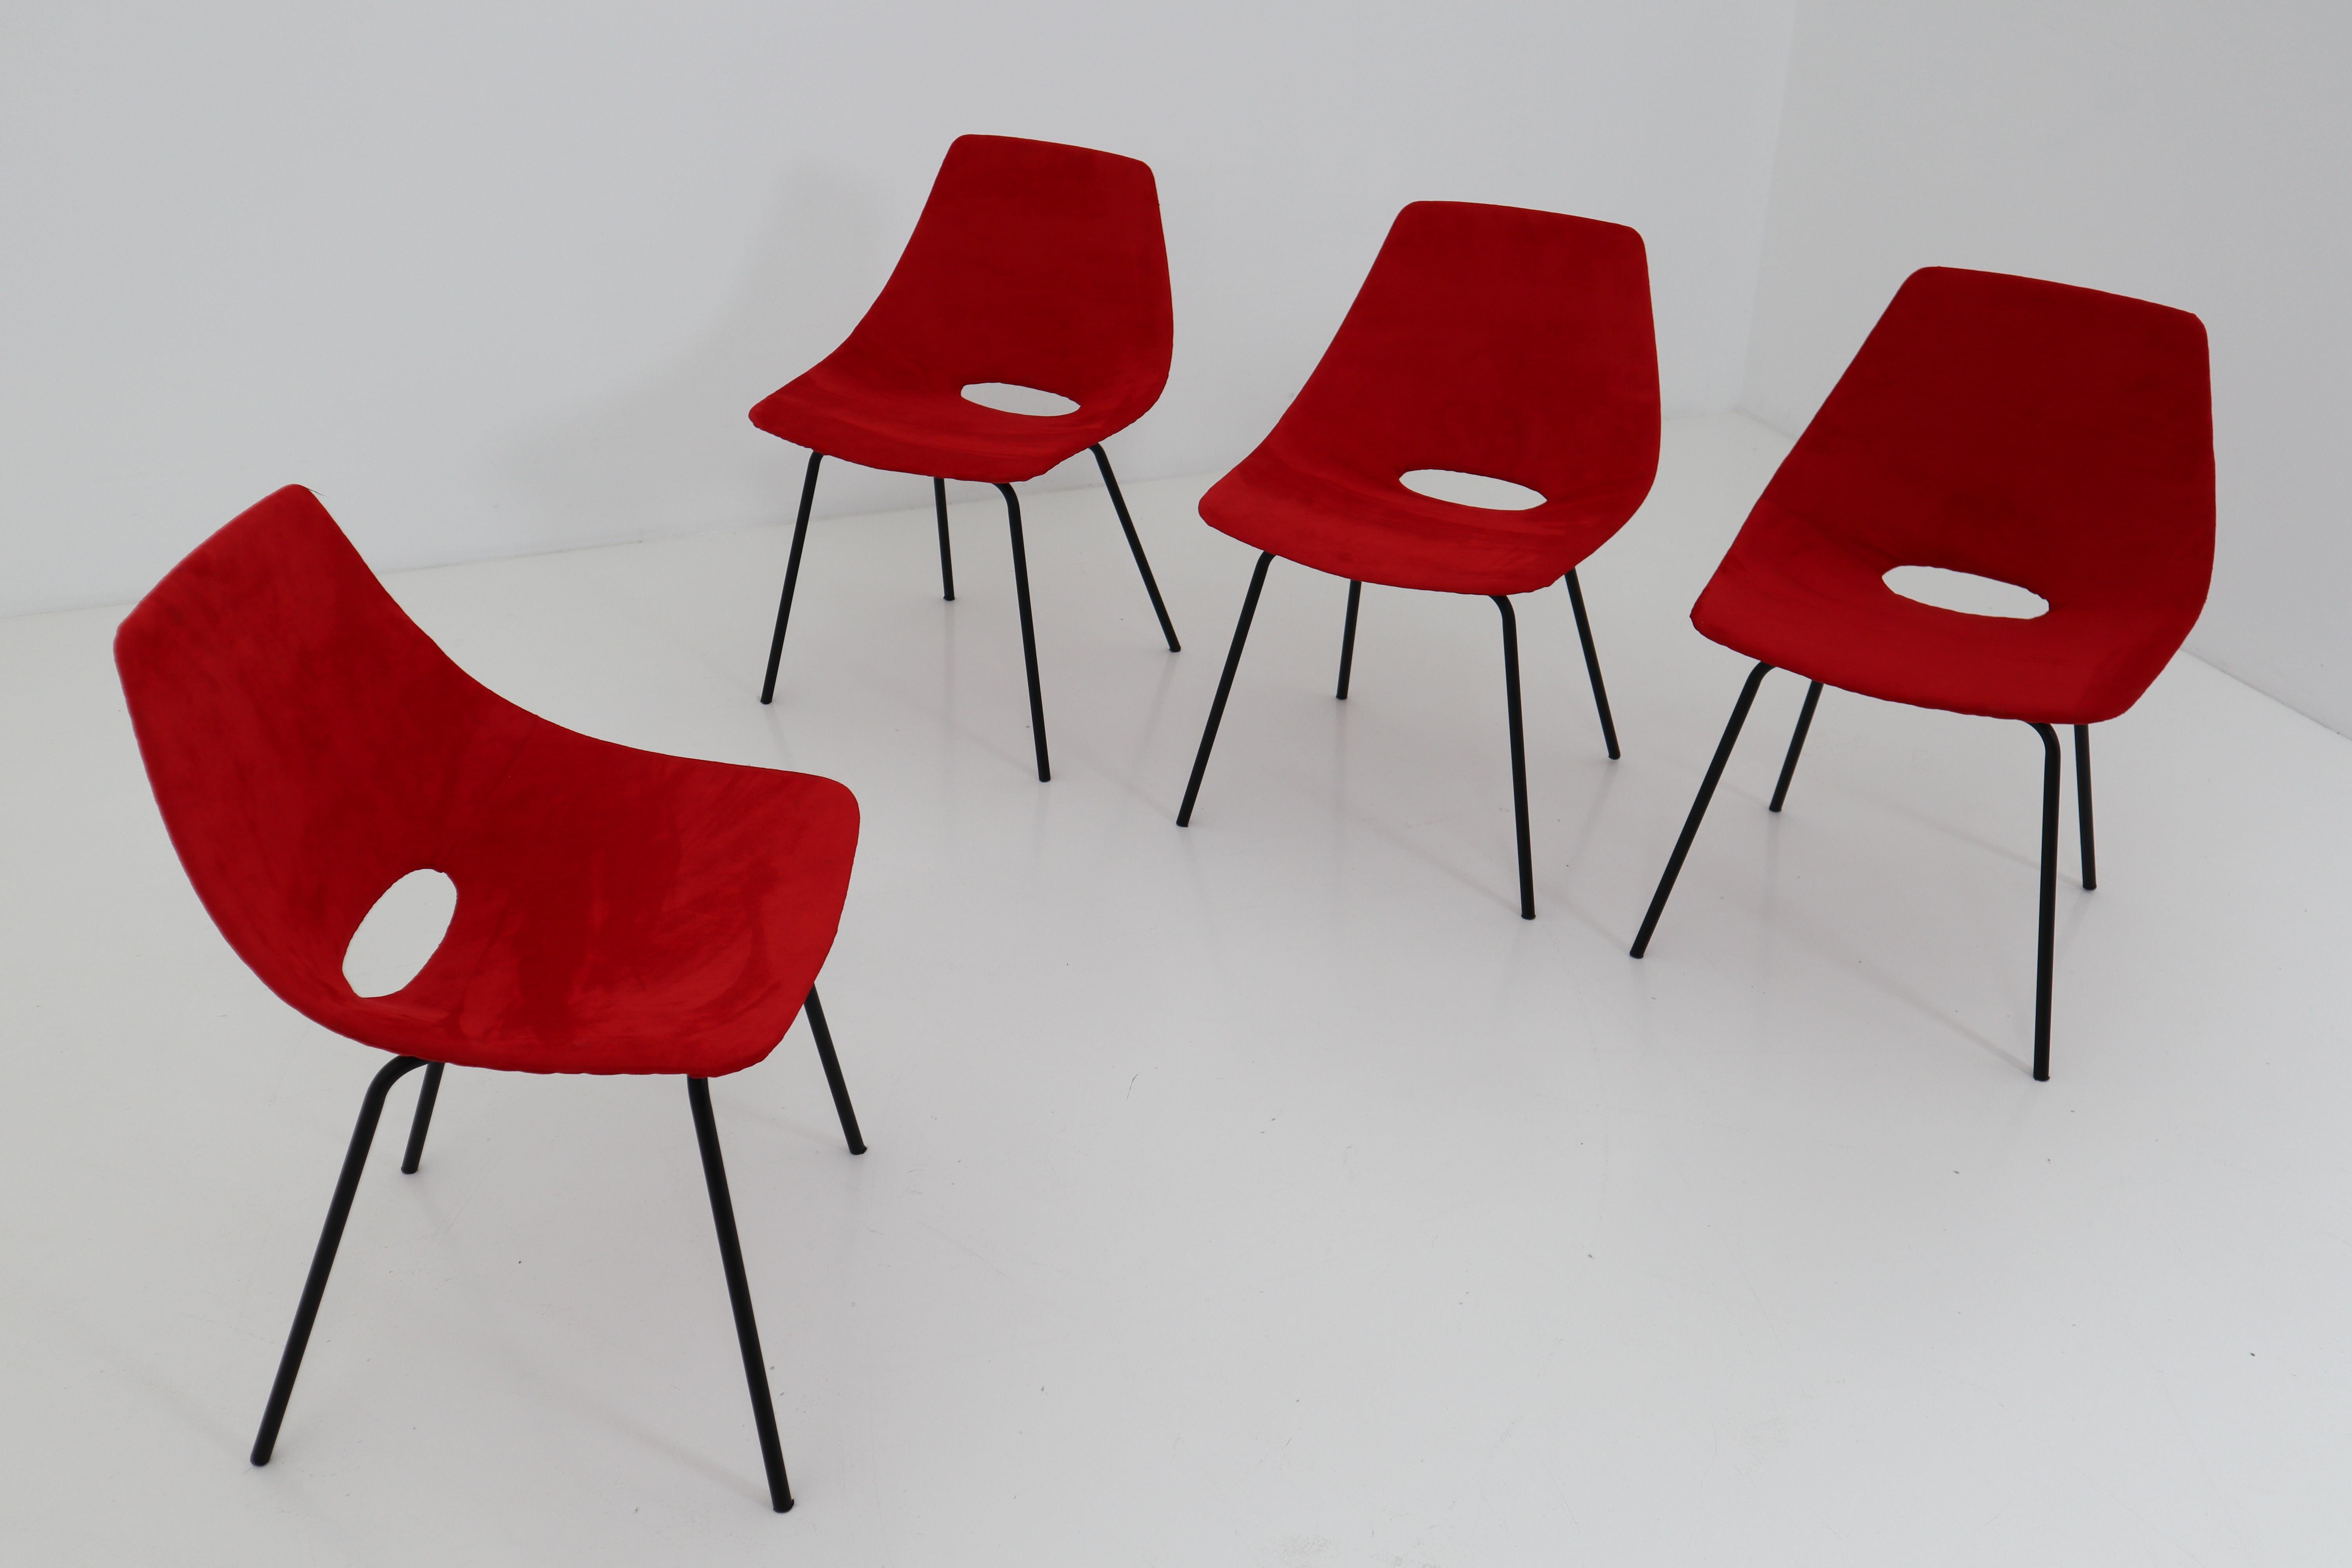 Set of four molded plywood chairs, attributed to Pierre Guariche are newly upholstered in red alcantara high-quality fabric with black lacquered metal legs. The chairs are from 1954 and manufactured by Steiner.